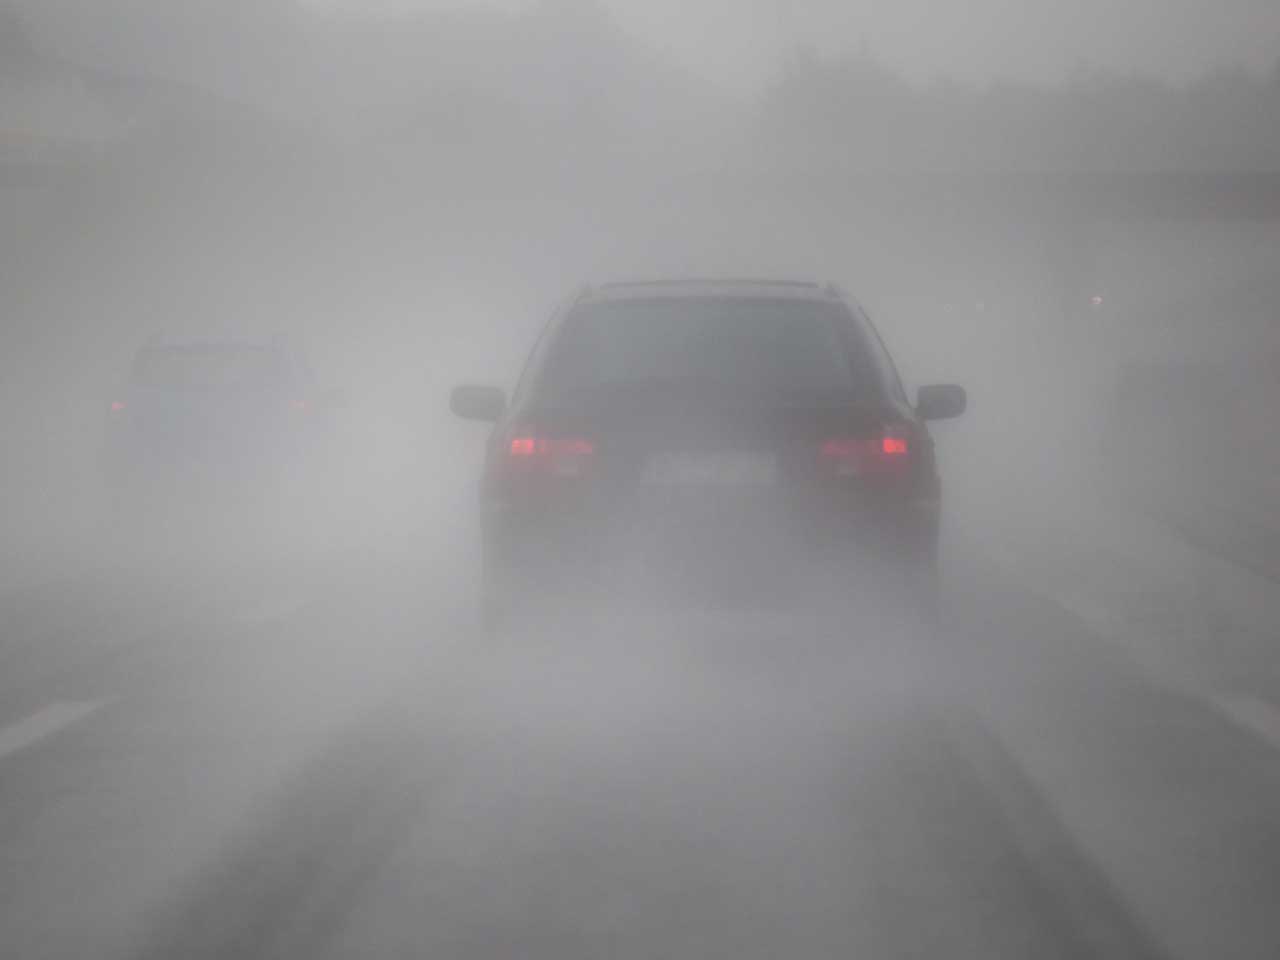 Car driving through misty and foggy road conditions